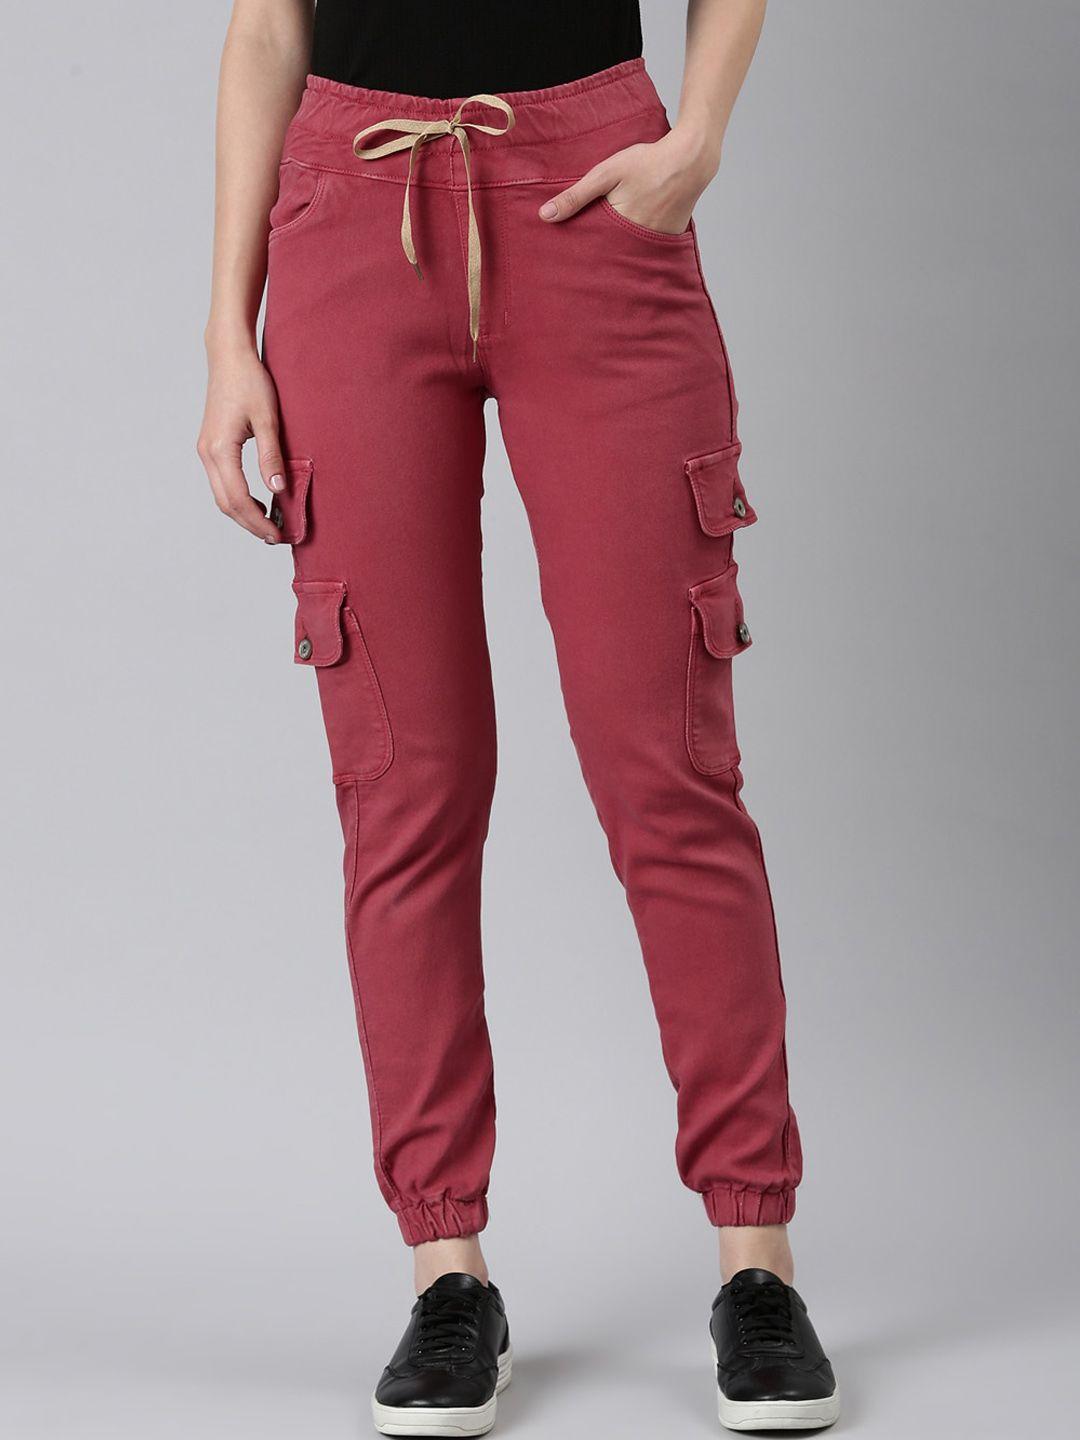 showoff women jean clean look cotton stretchable jogger